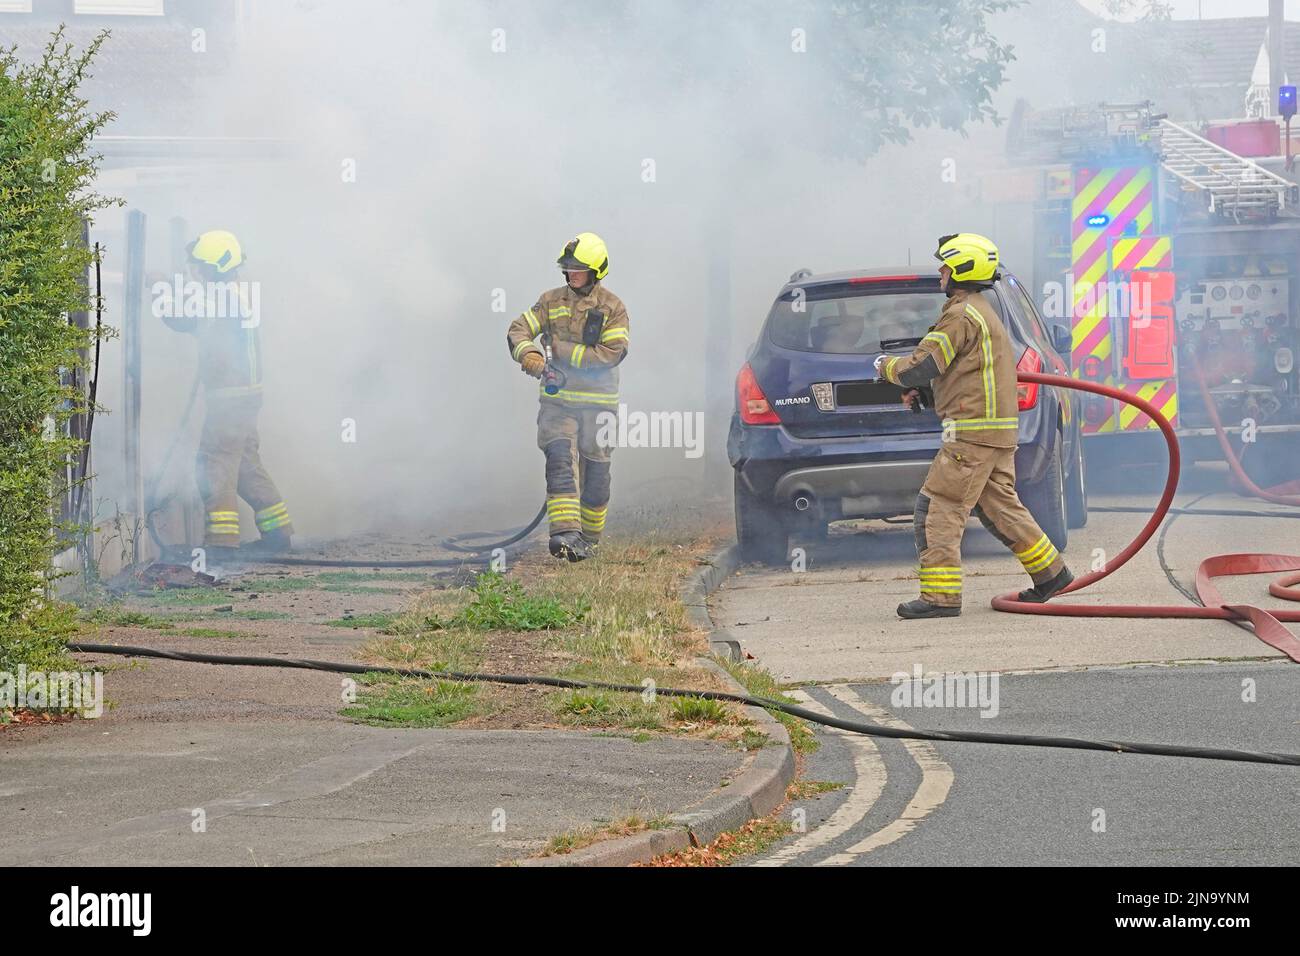 Essex Fire and Rescue Service team work group firefighters in protective clothing working in dangerous & hazardous conditions on house fire England UK Stock Photo